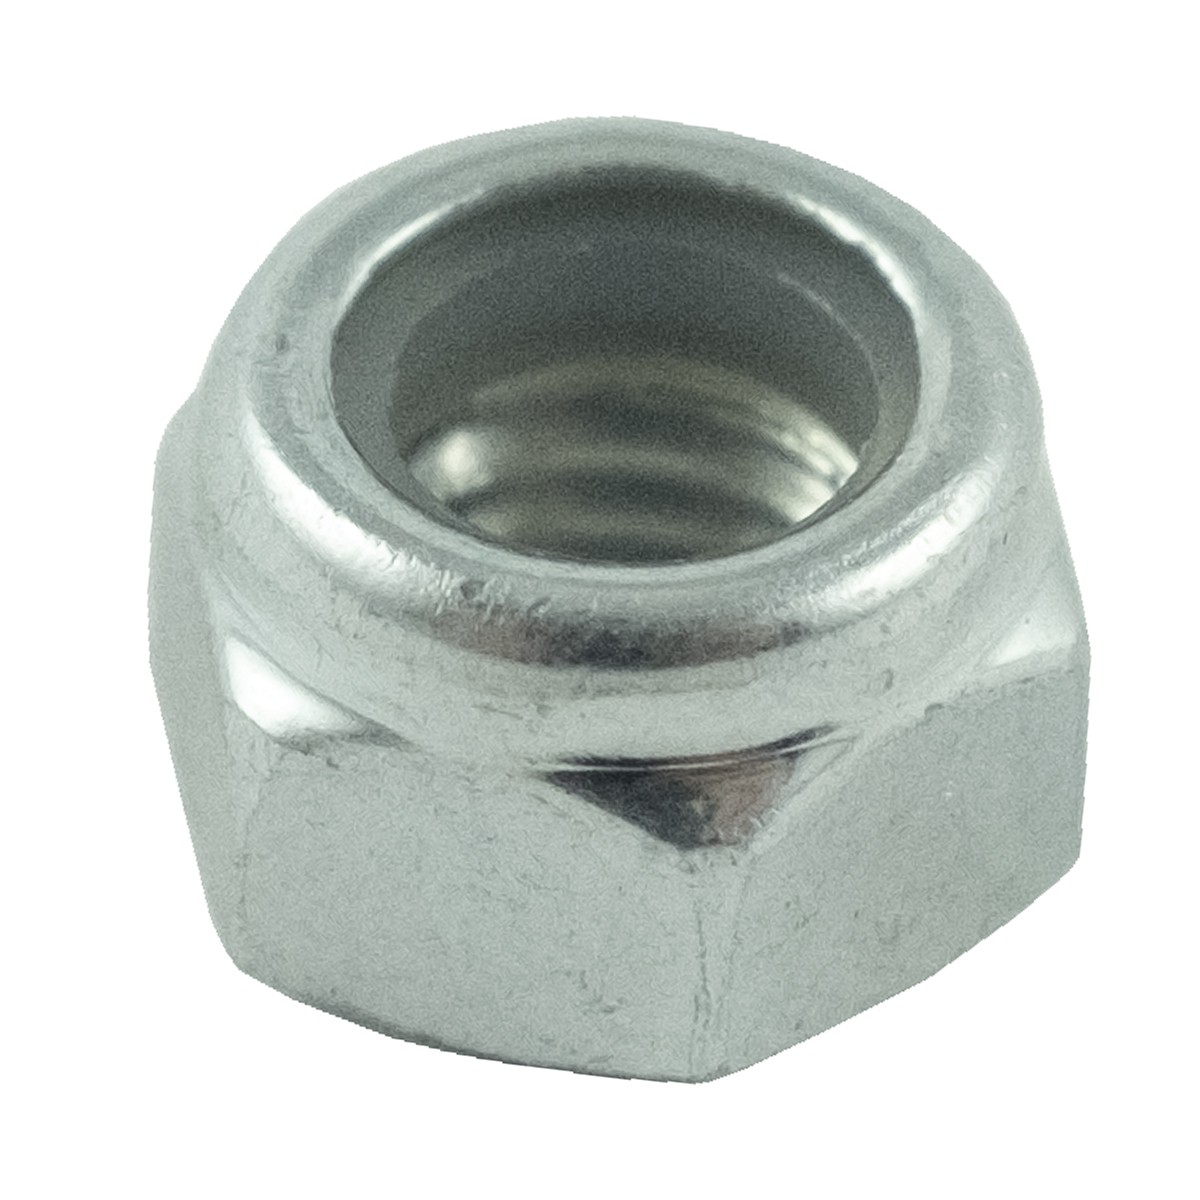 Self-locking nut M8 x 1.25 / LS MT1.25 / LS MT3.35 / LS MT3.40 / LS MT3.50 / LS MT3.60 / TRG870 / 40027836